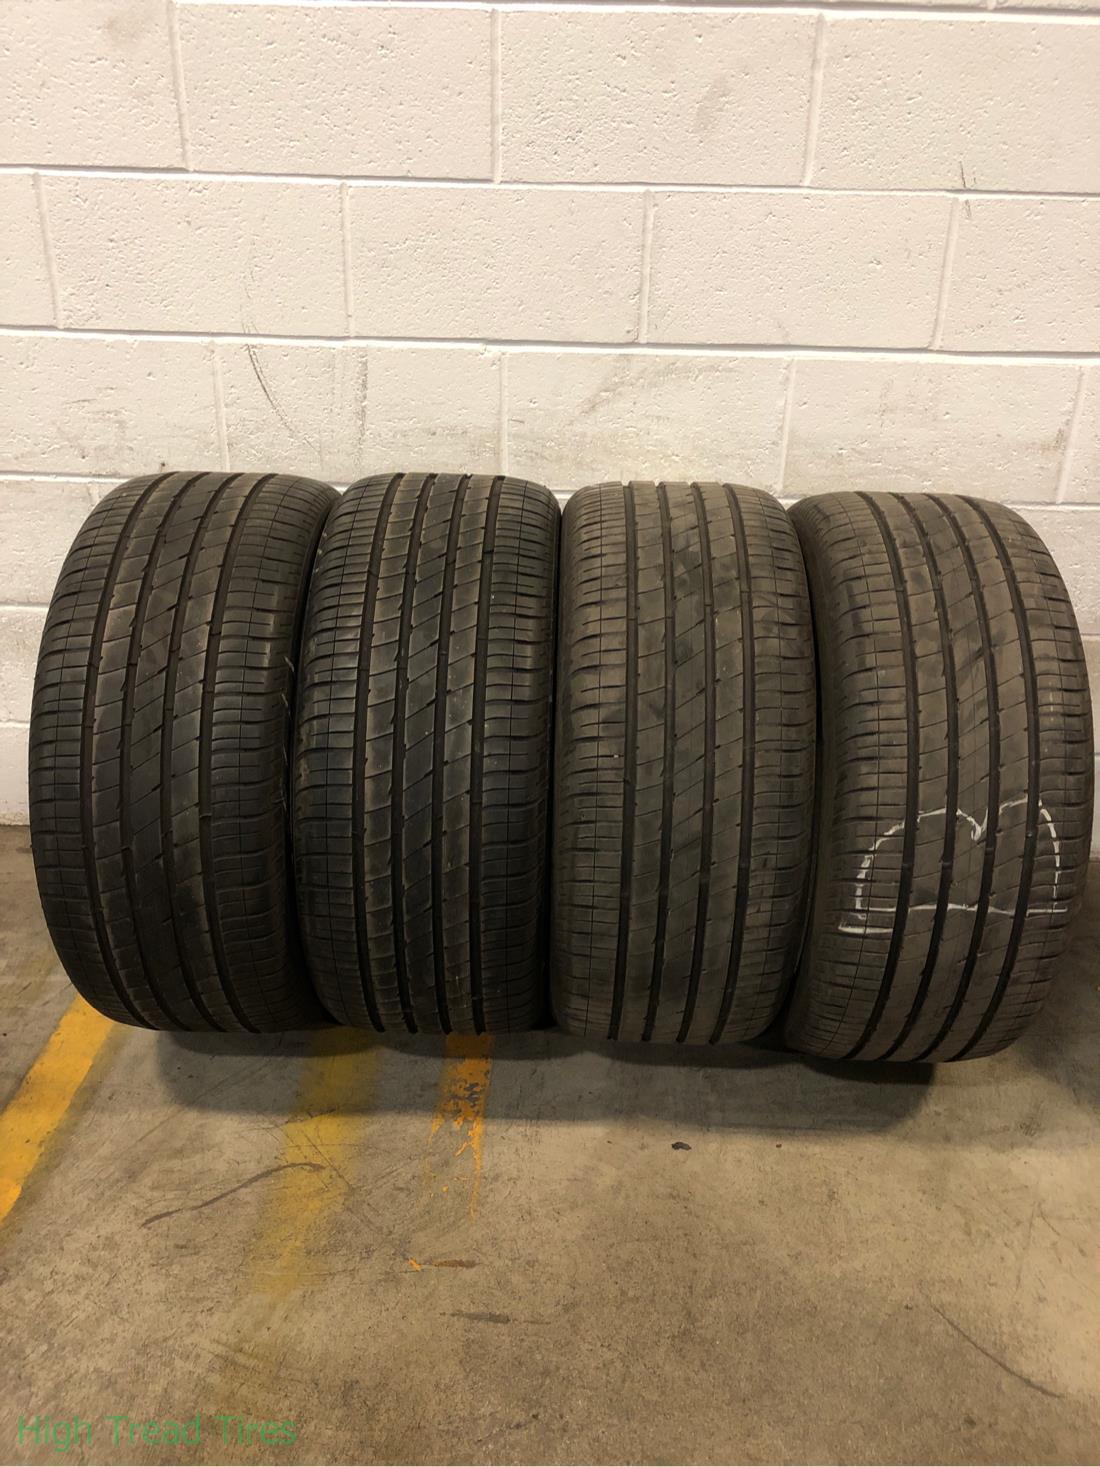 4x P255/40R20 Goodyear Eagle F1 Asymmetric 5 TO 8/32 Used Tires